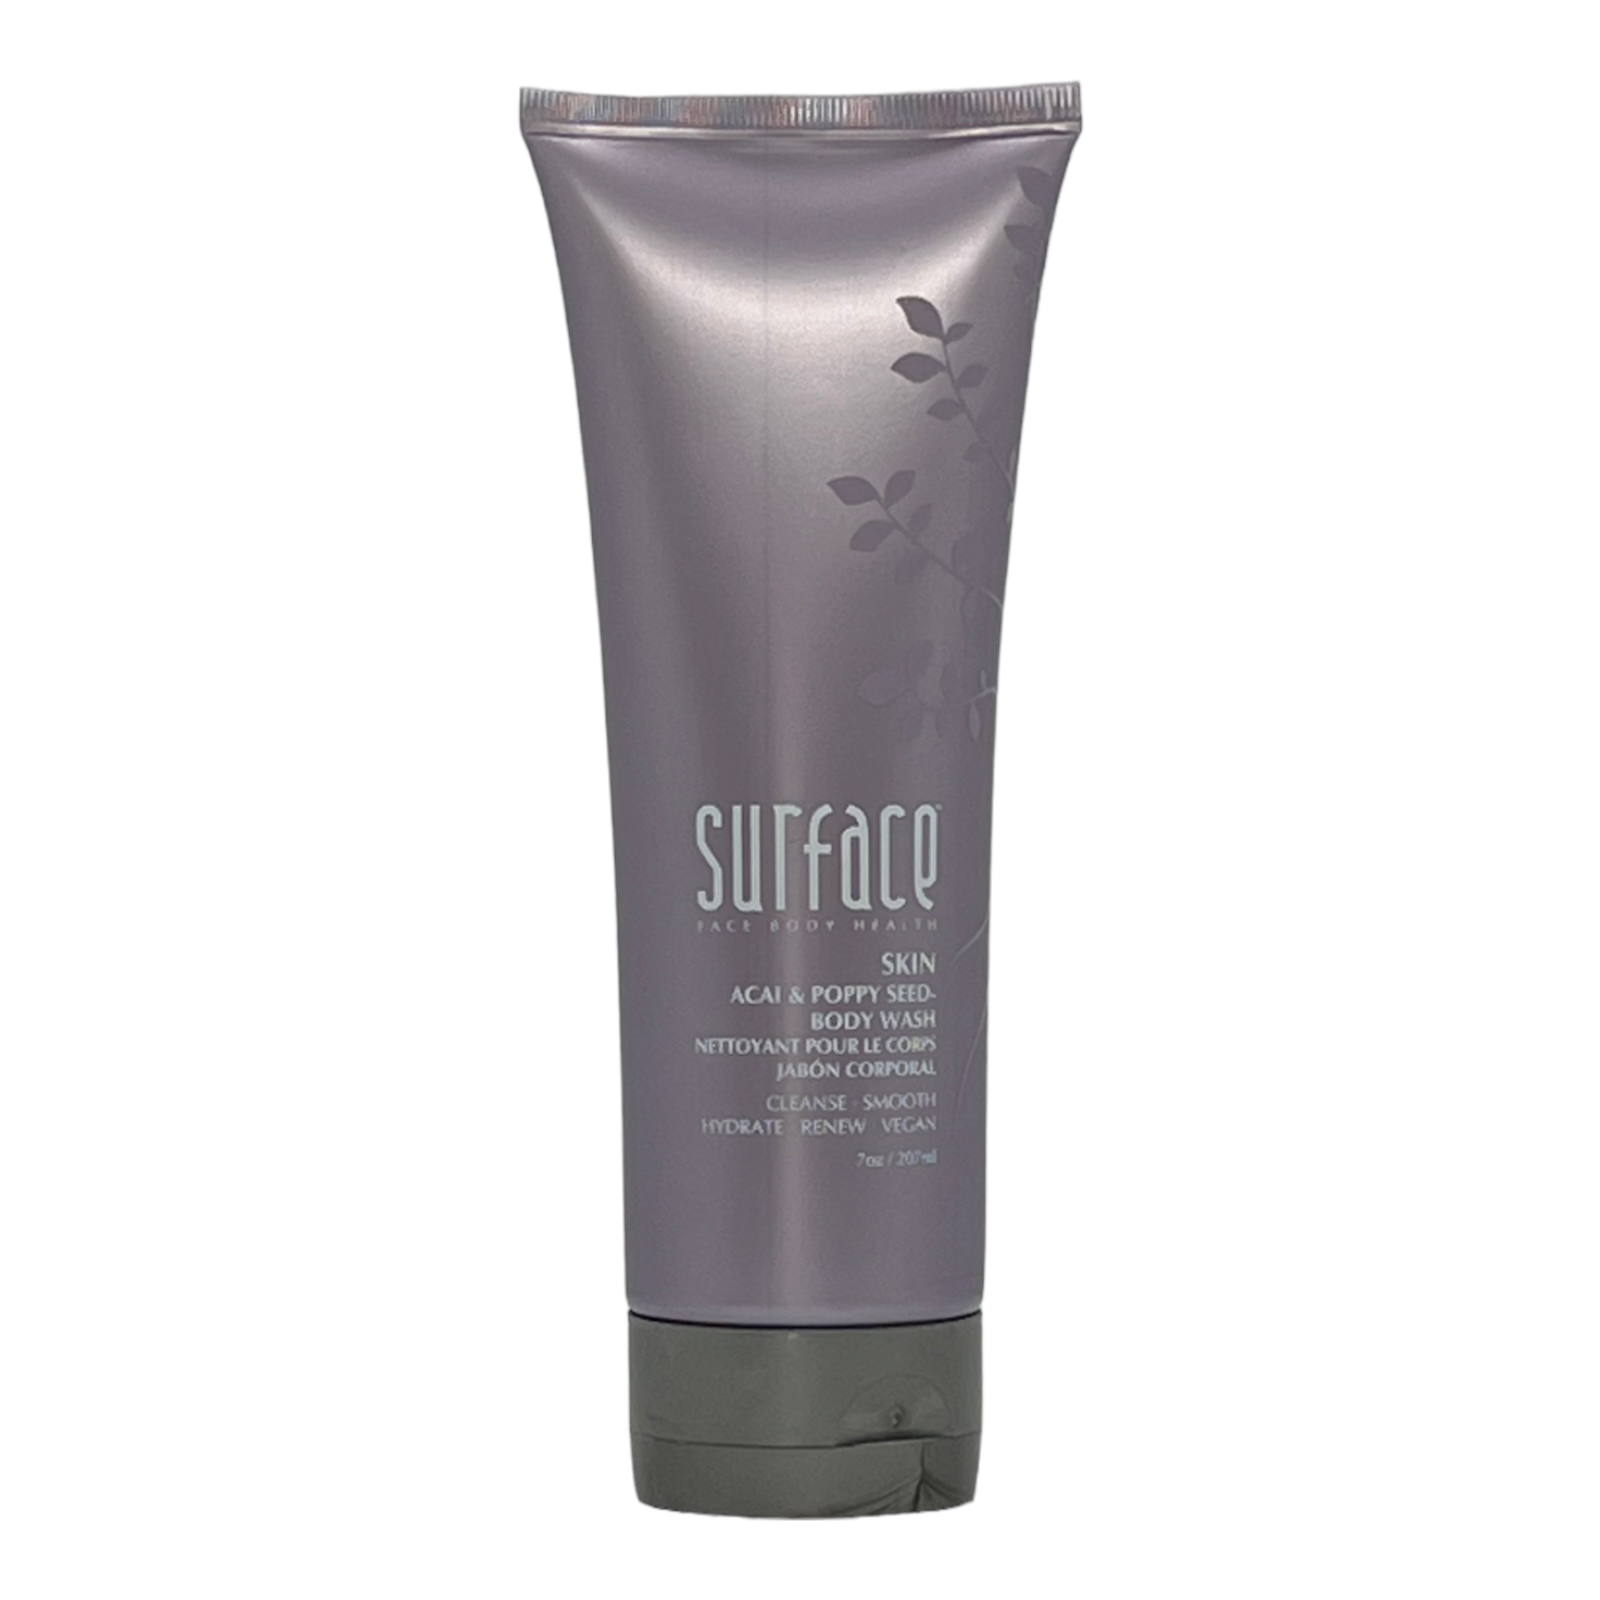 Primary image for Surface Skin Acai & Poppy Seed Body Wash 7 Oz